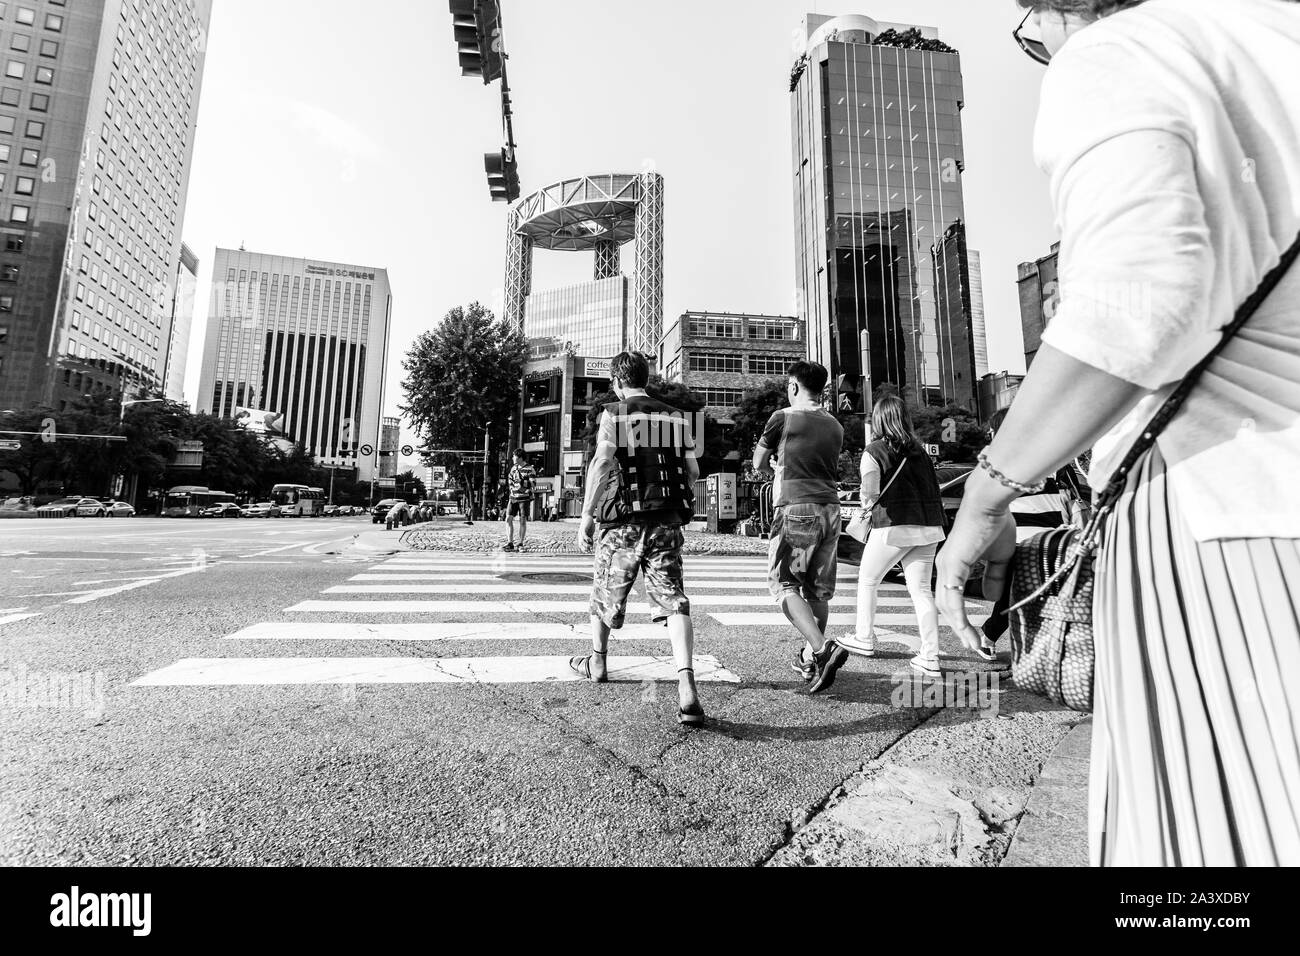 Seoul, South Korea - May 31, 2017: Pedestrians crossing the street in the downtown Seoul. Stock Photo